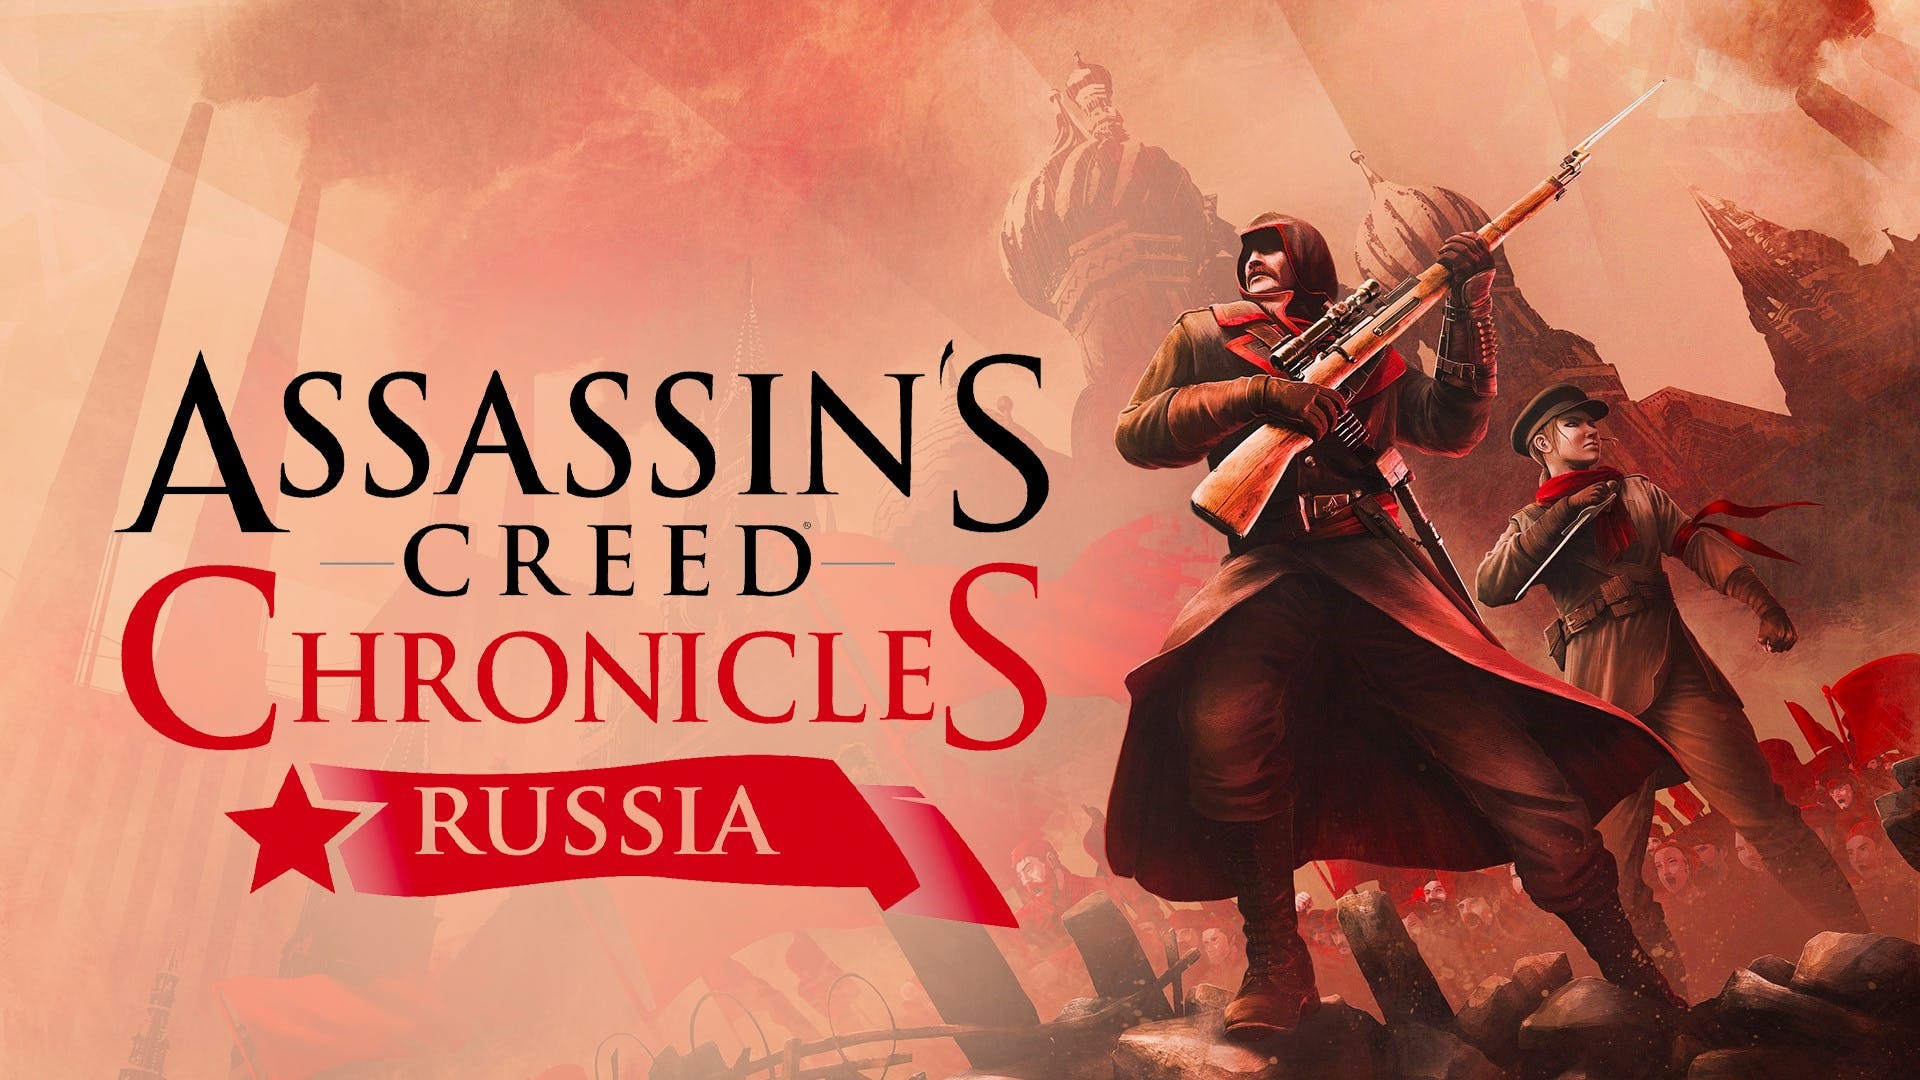 Assassins creed russia прохождение. Assassin's Creed Chronicles: Россия. Ассасин Крид Chronicles Russia. Assassin's Creed Chronicles Russia обложка.